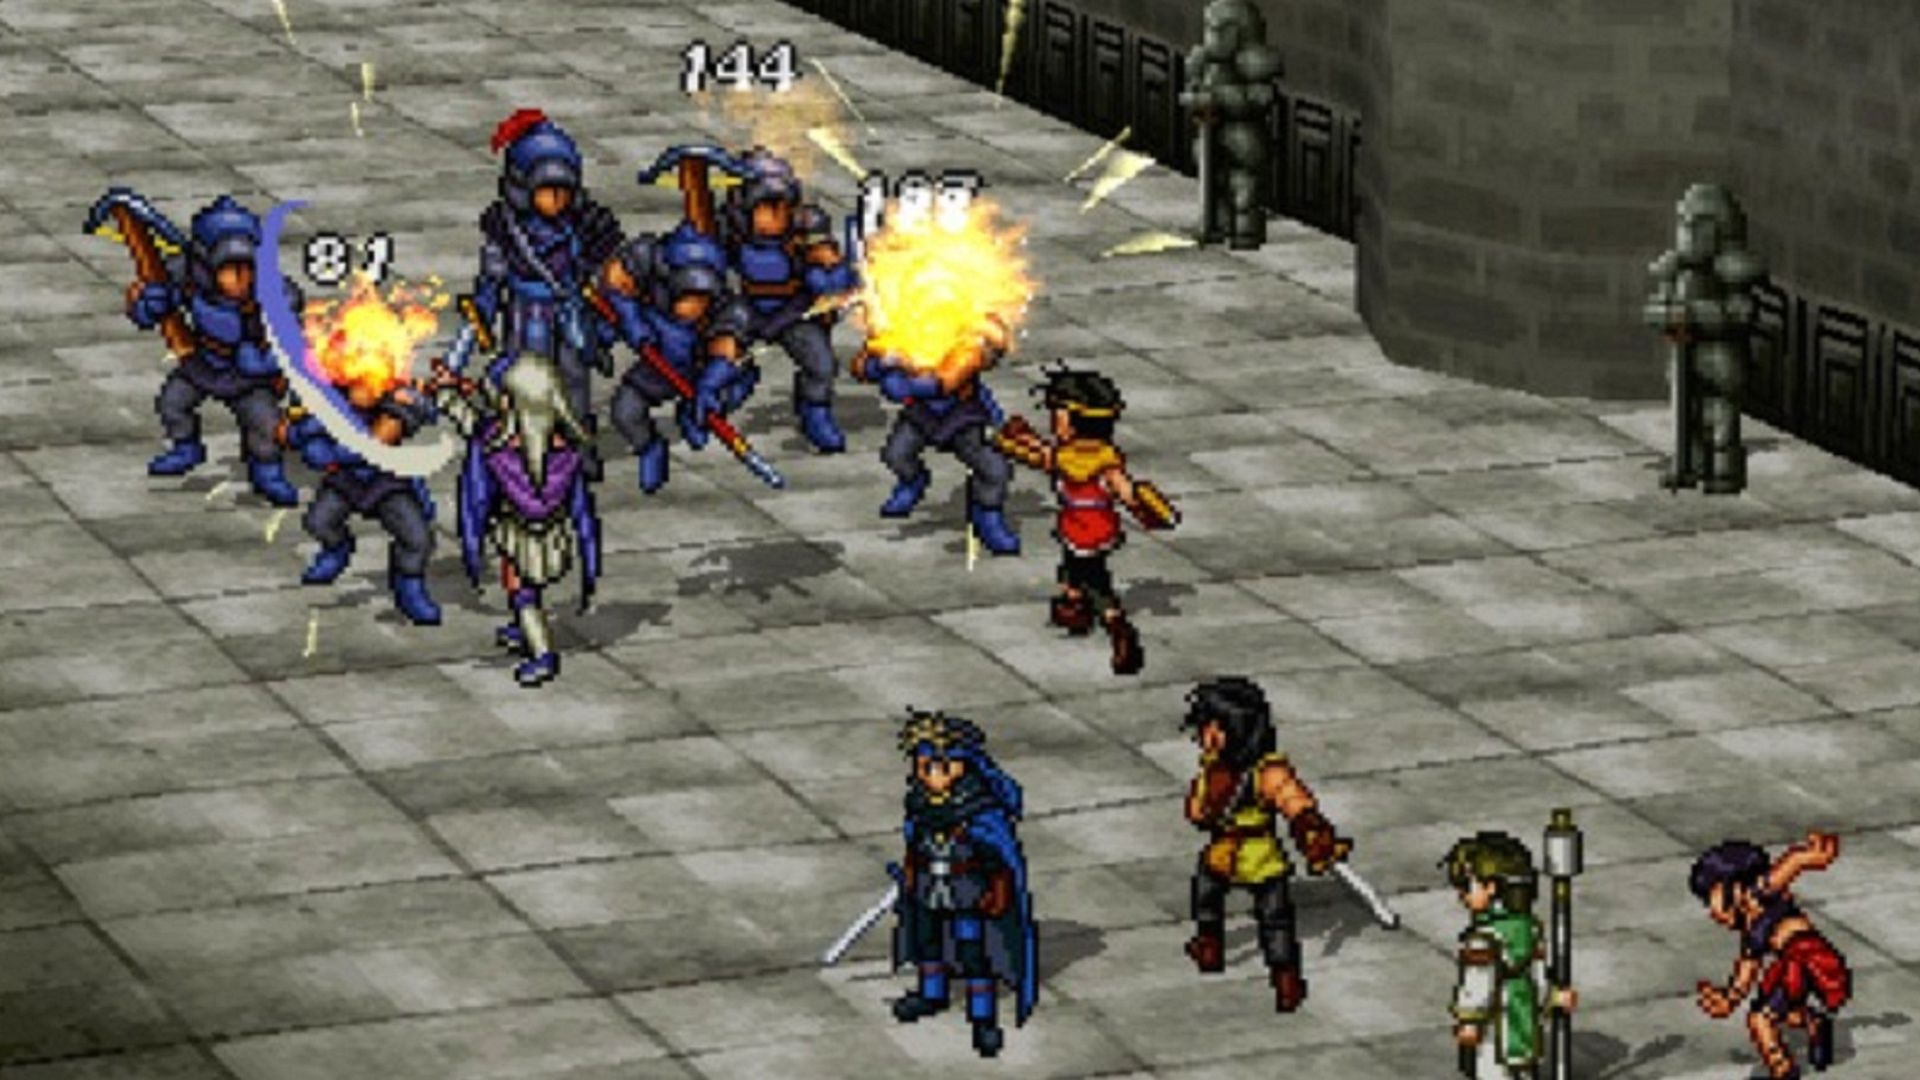 Suikoden 1 & 2 is one of the best games that deserves an HD remaster. 